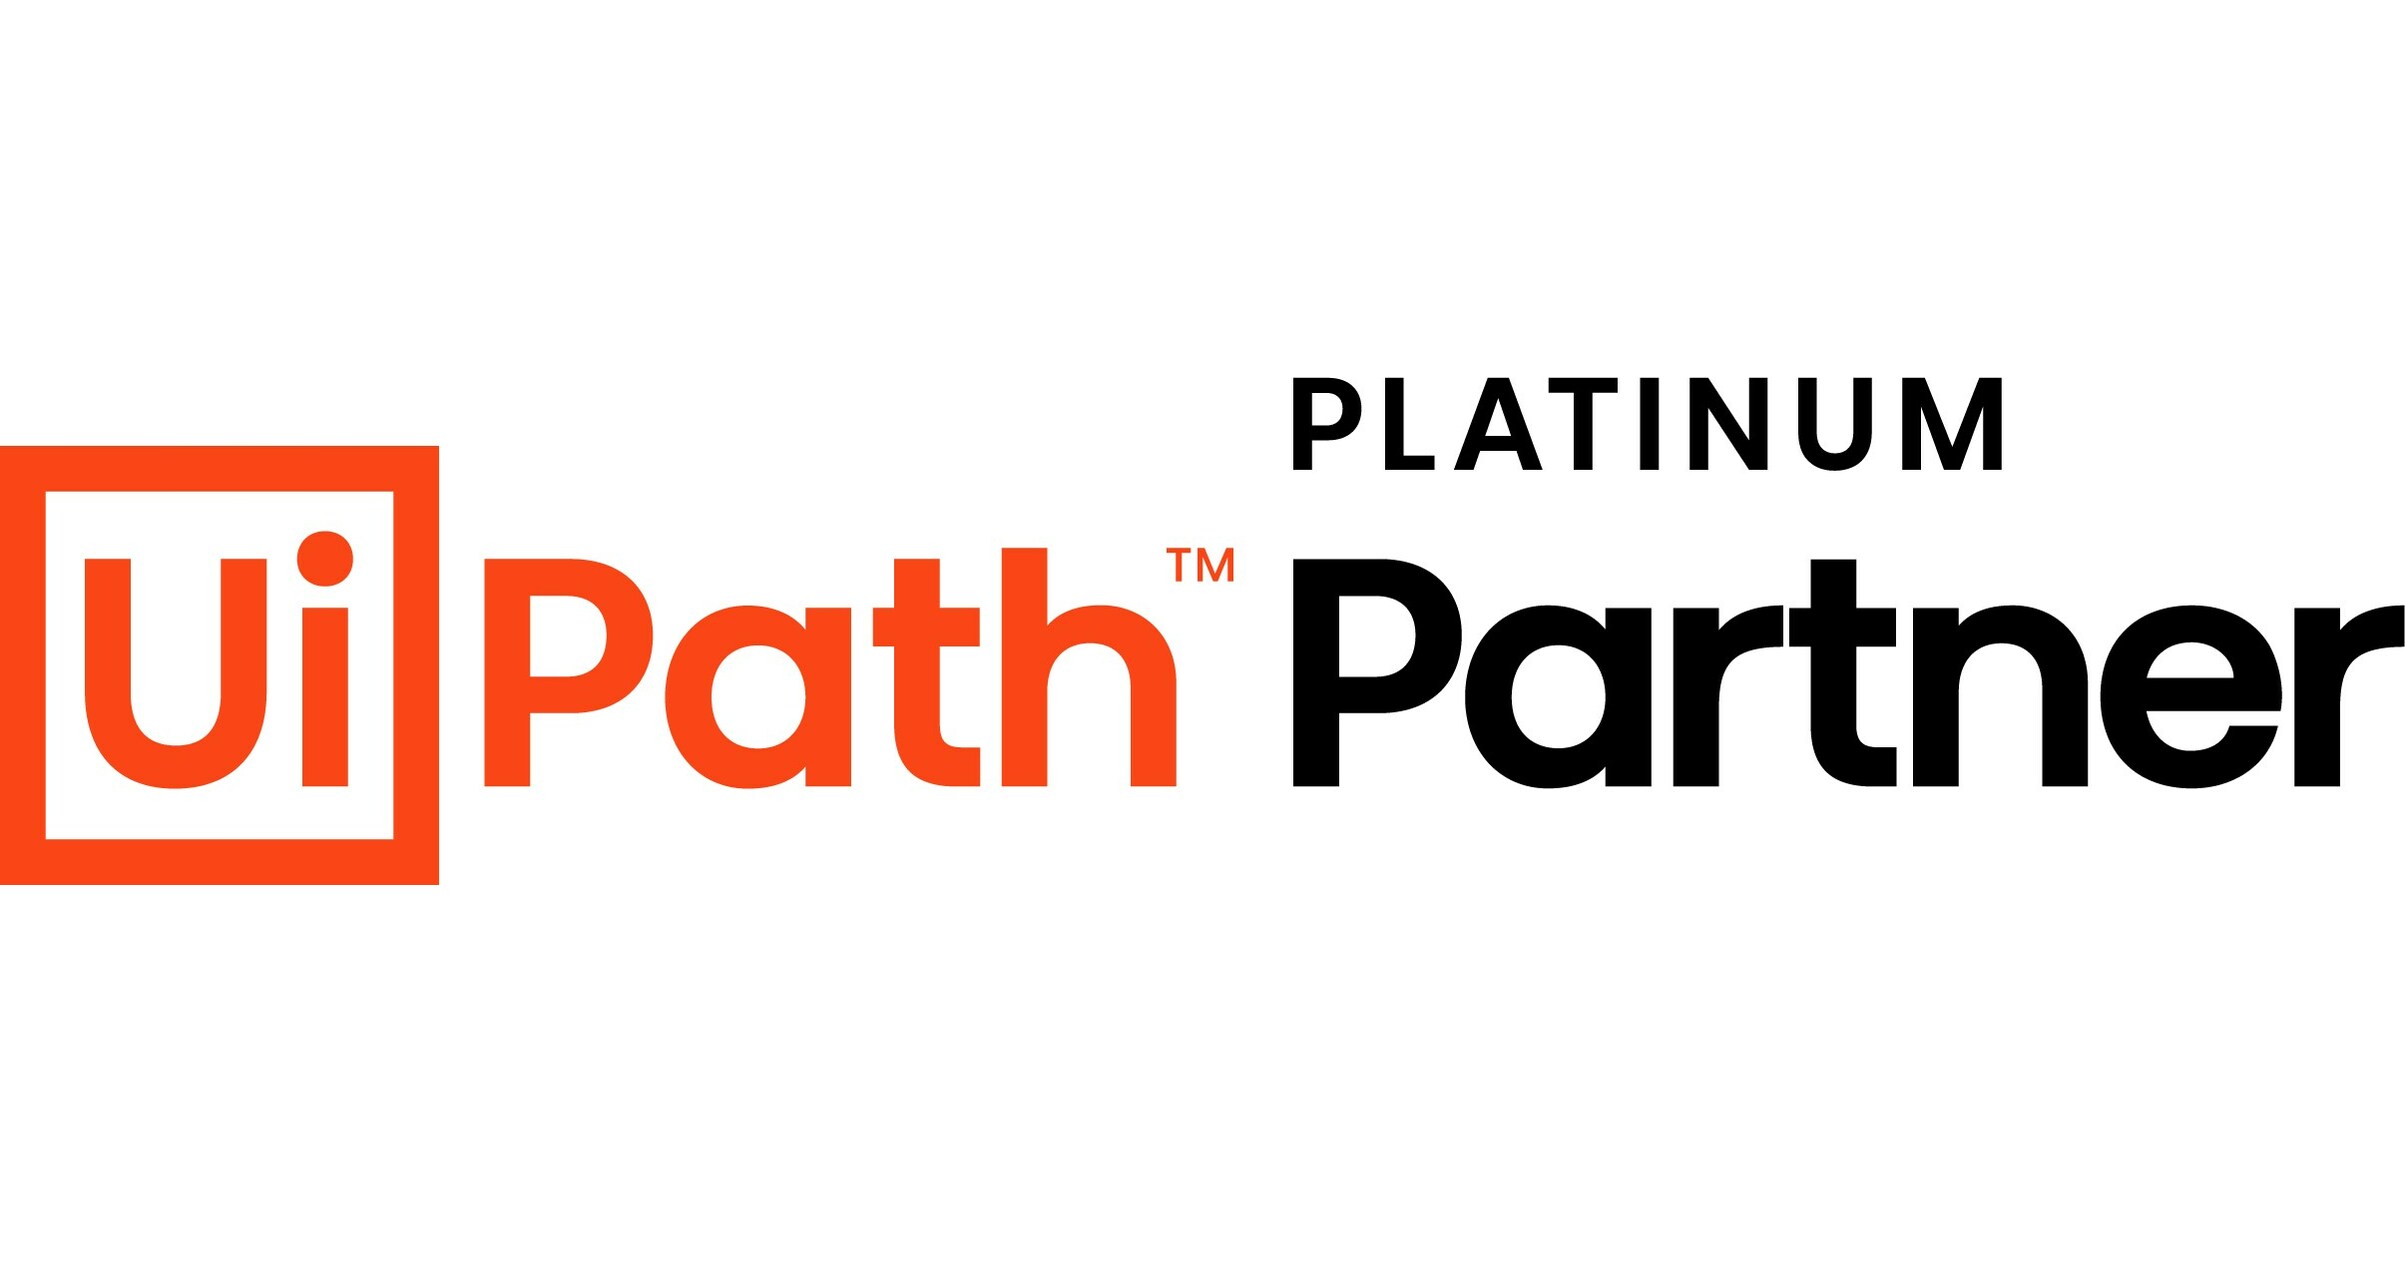 Reveal Group maintains top-tier Platinum partnership level with UiPath -  Reveal Group